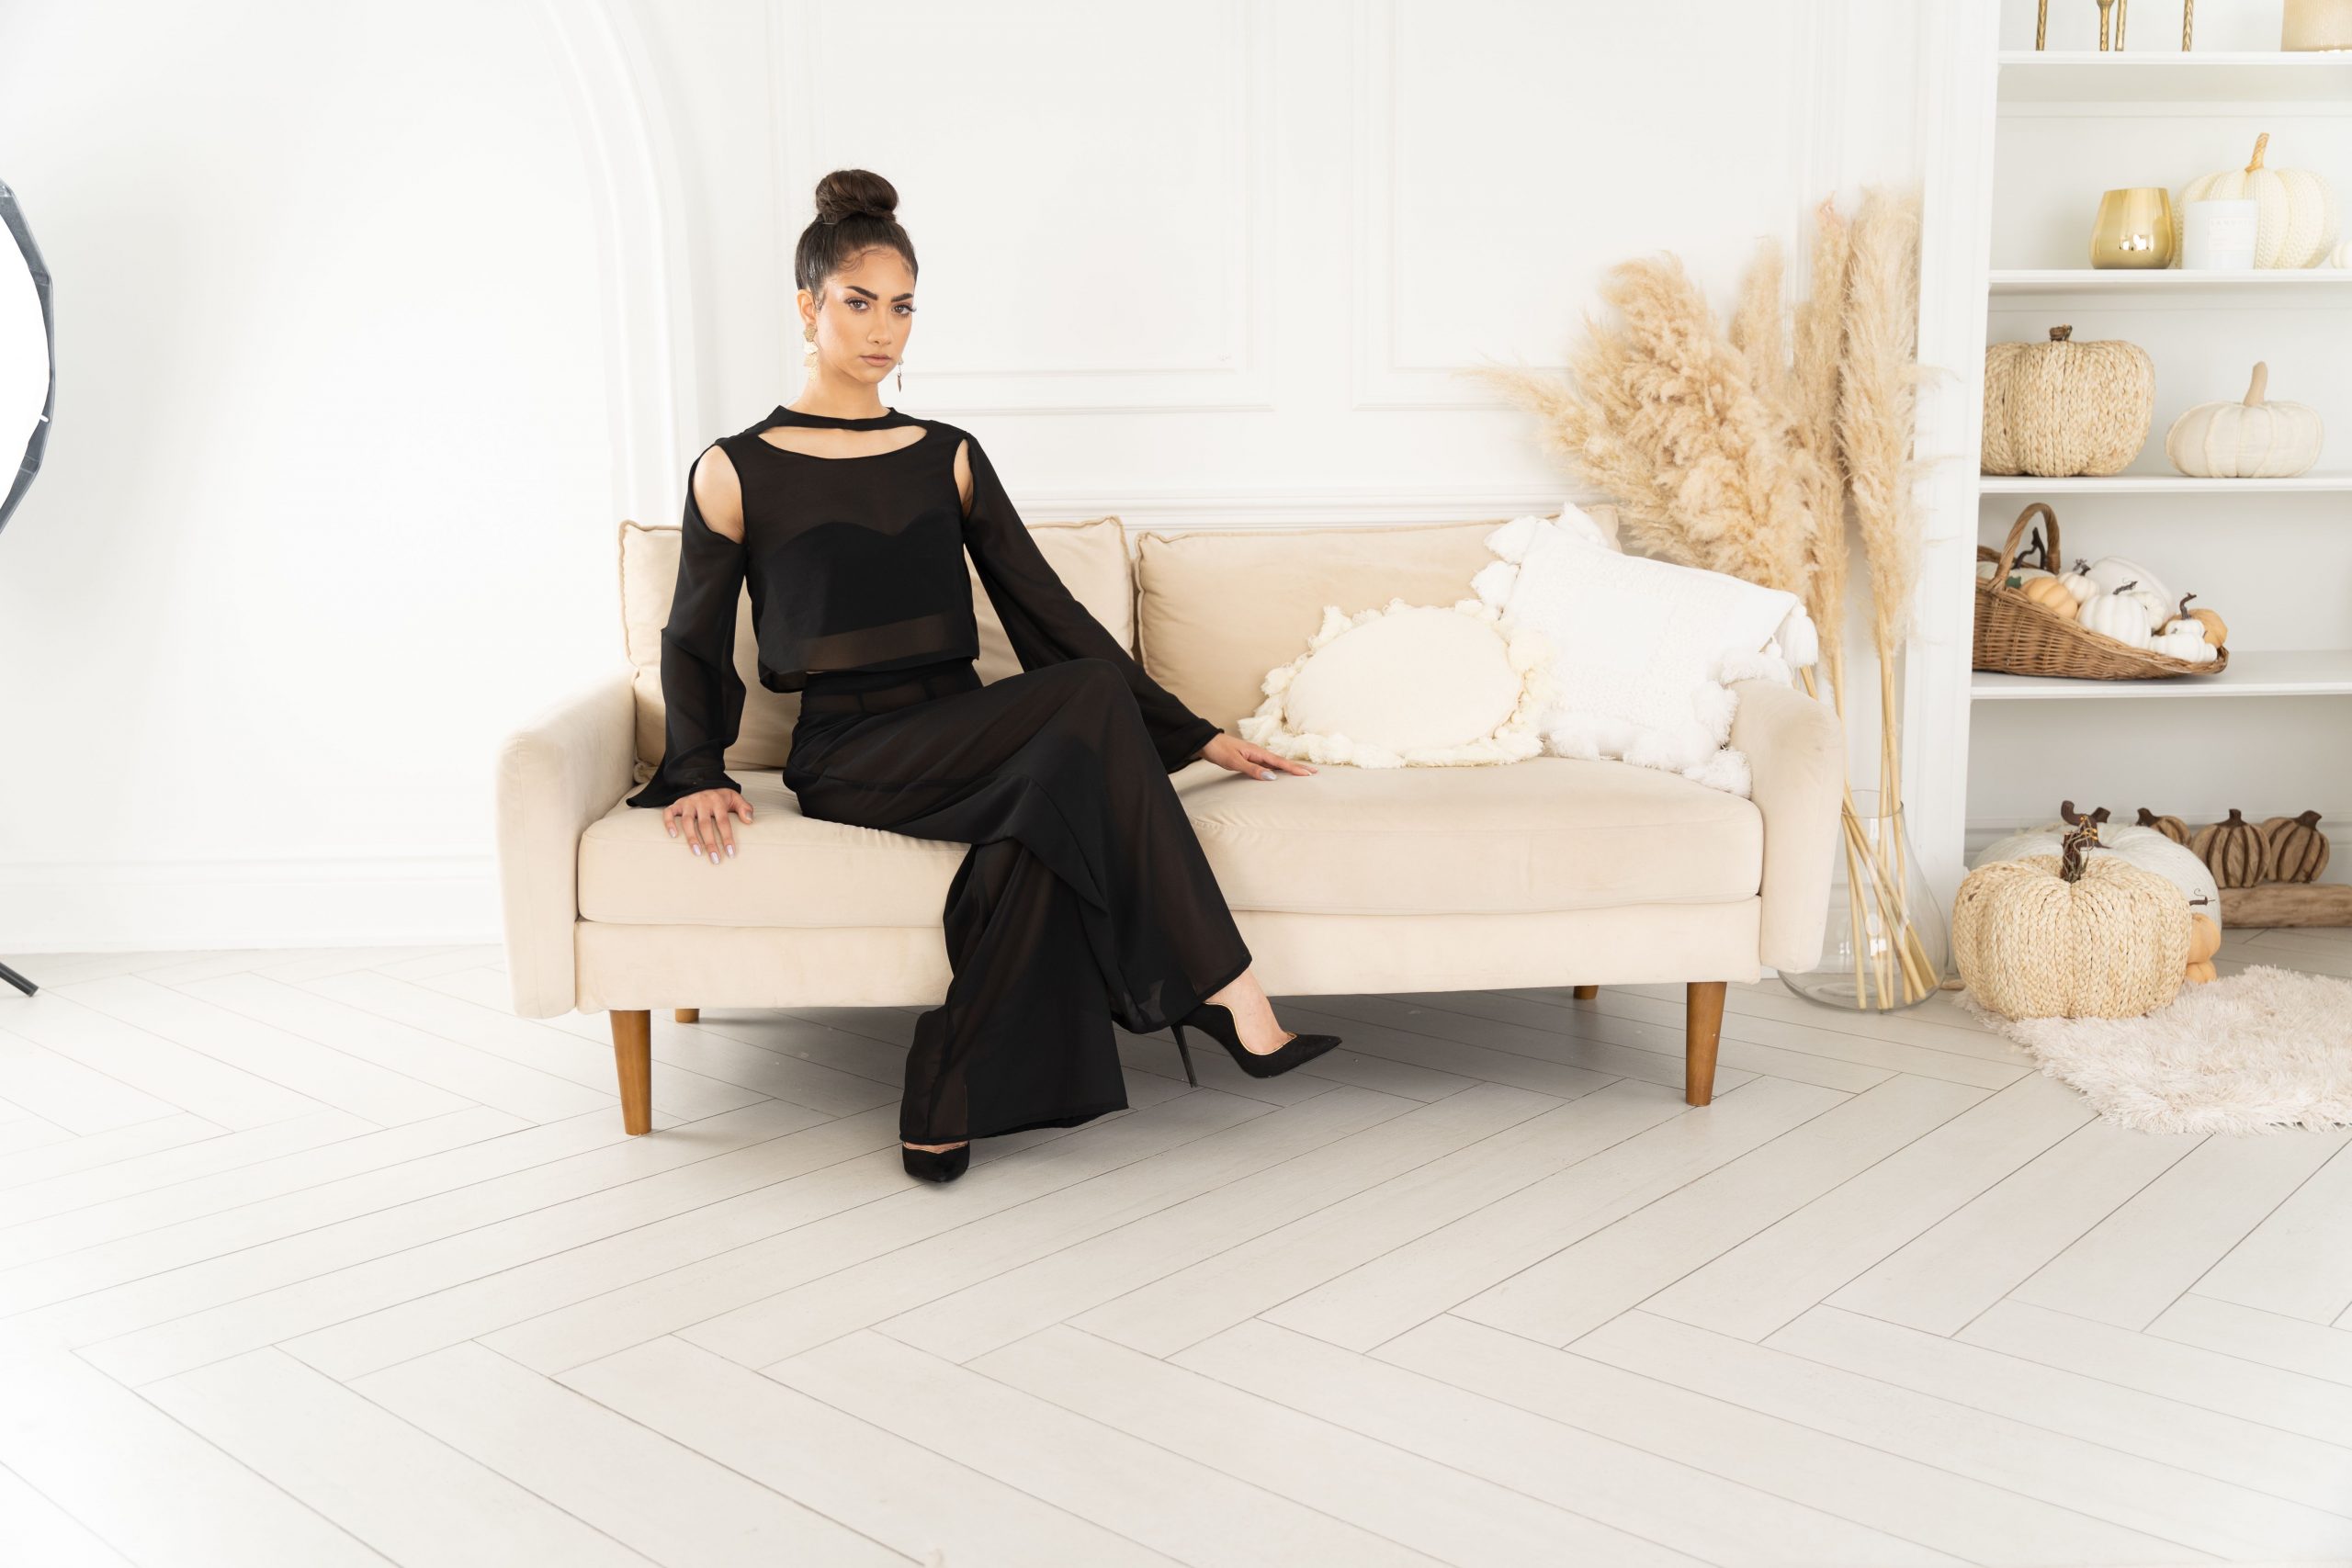 A woman in black dress sitting on a couch.